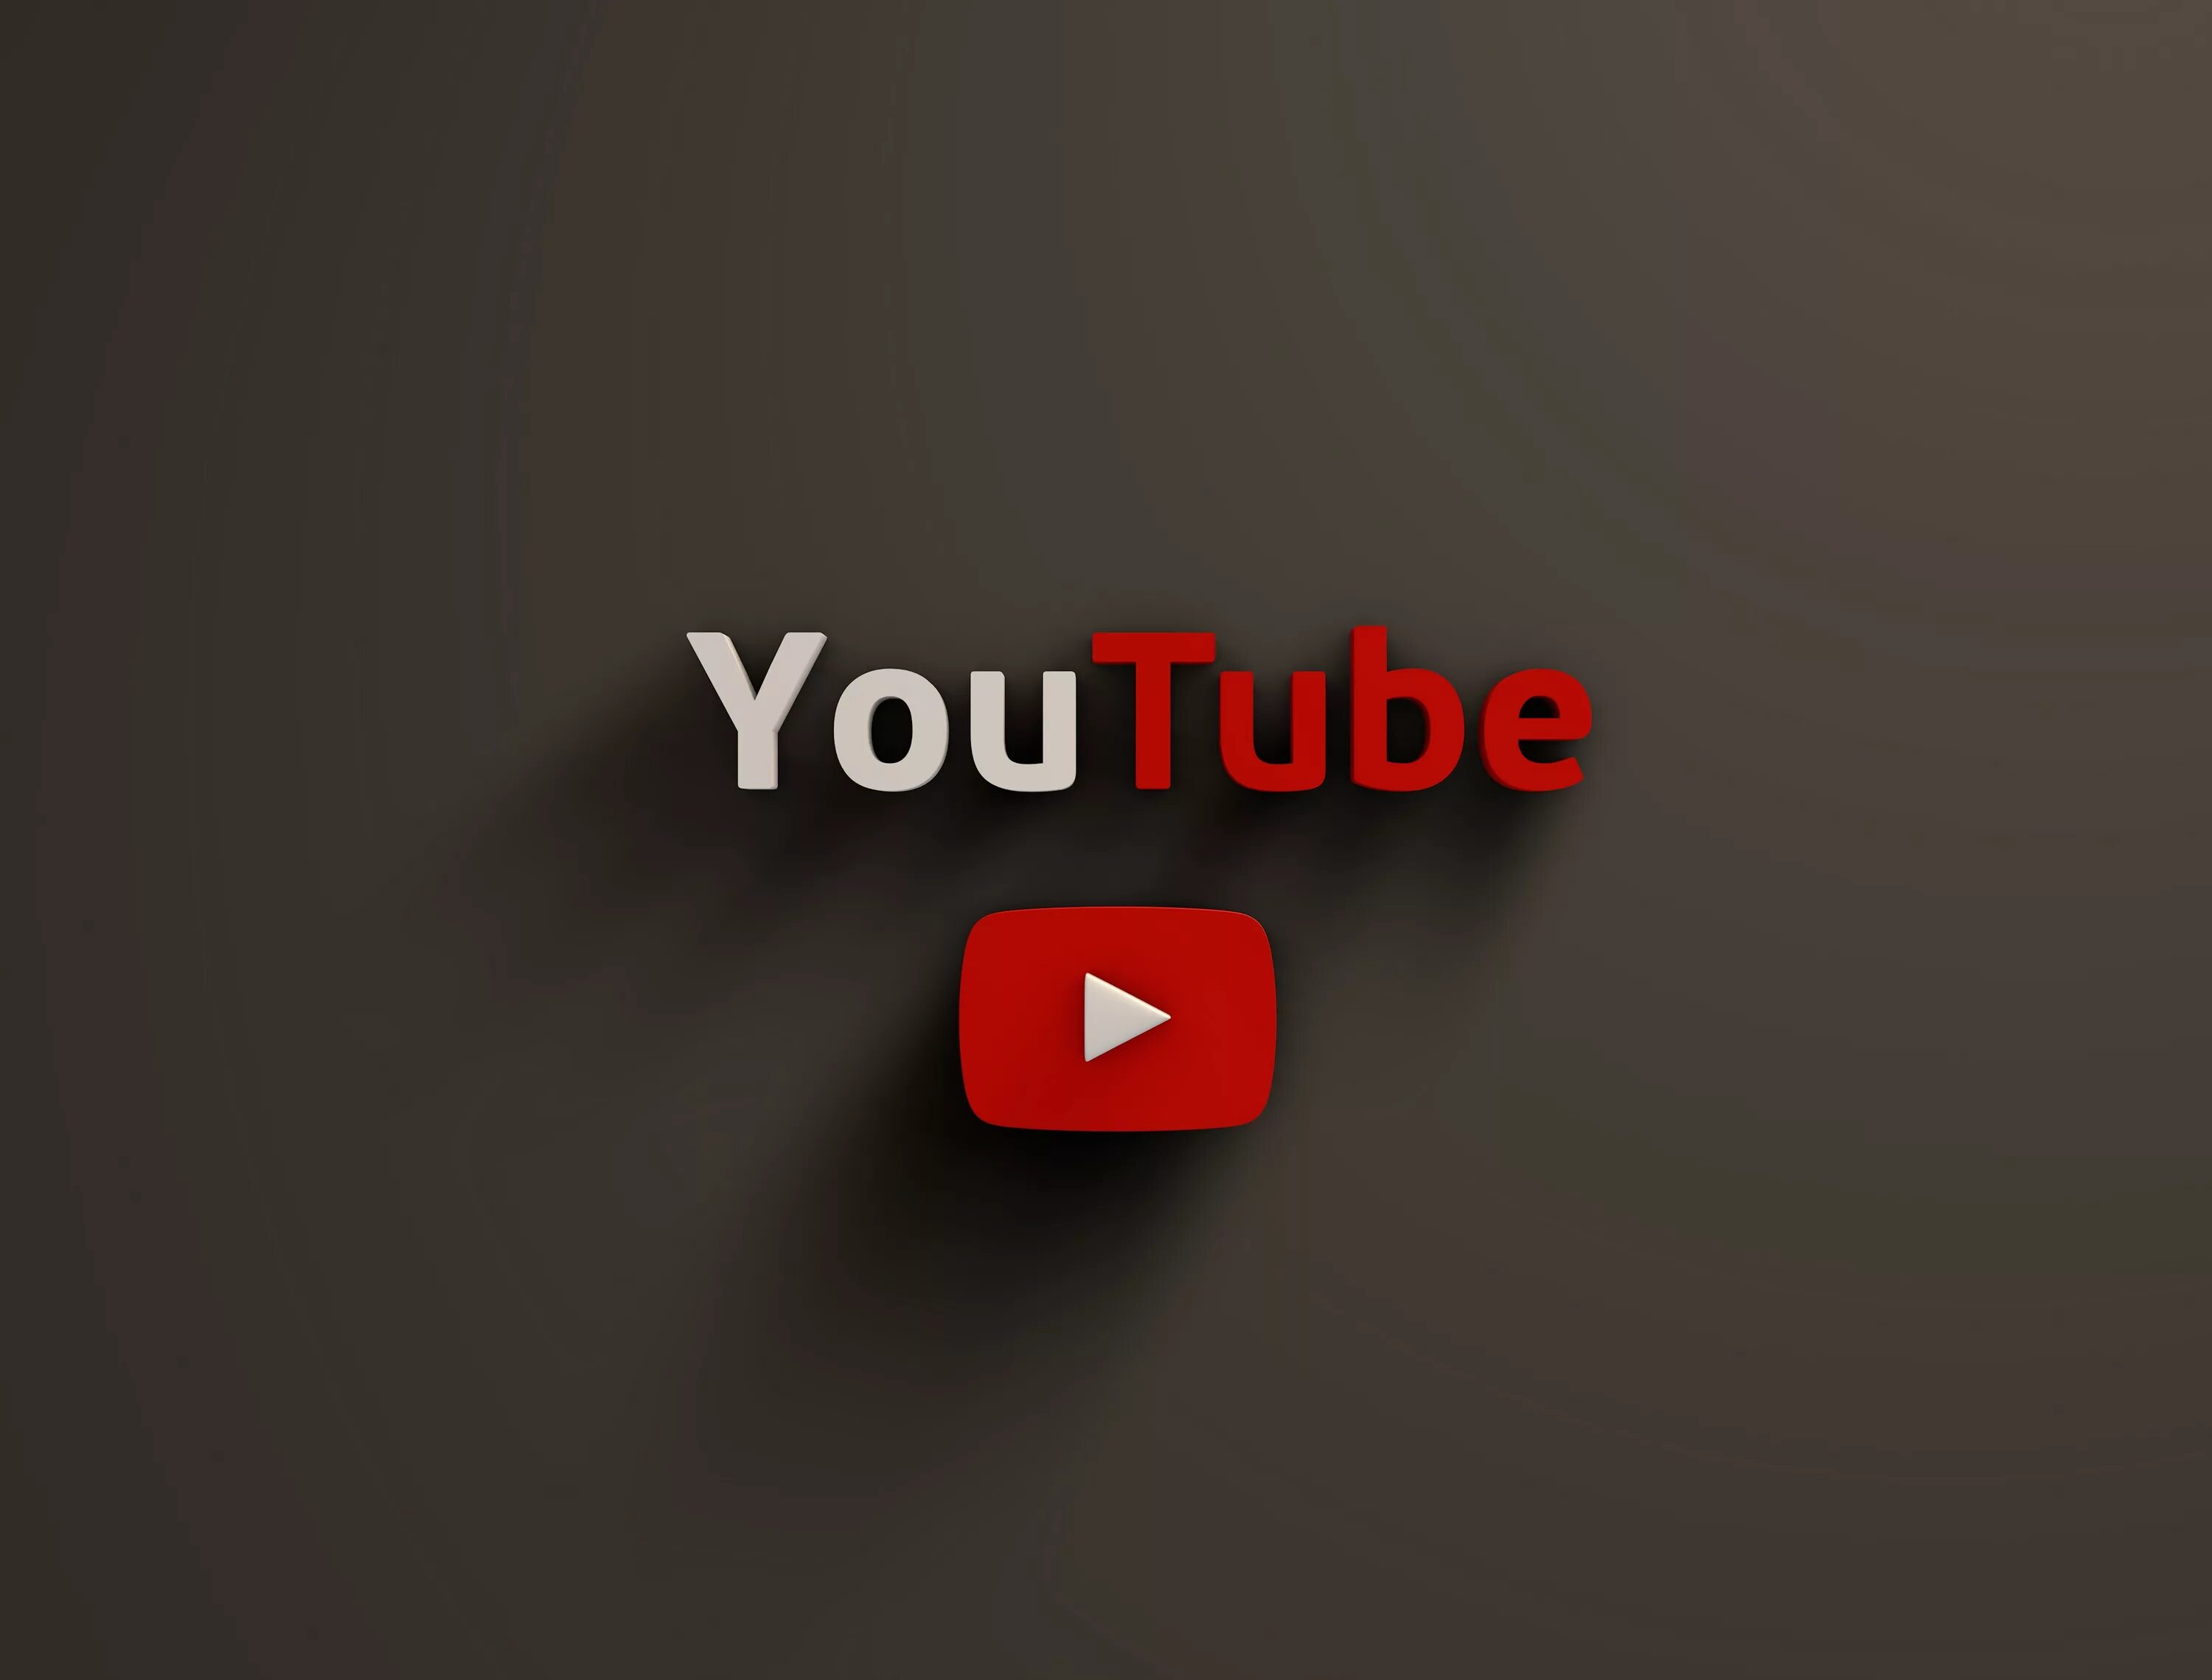 Youtube feature https